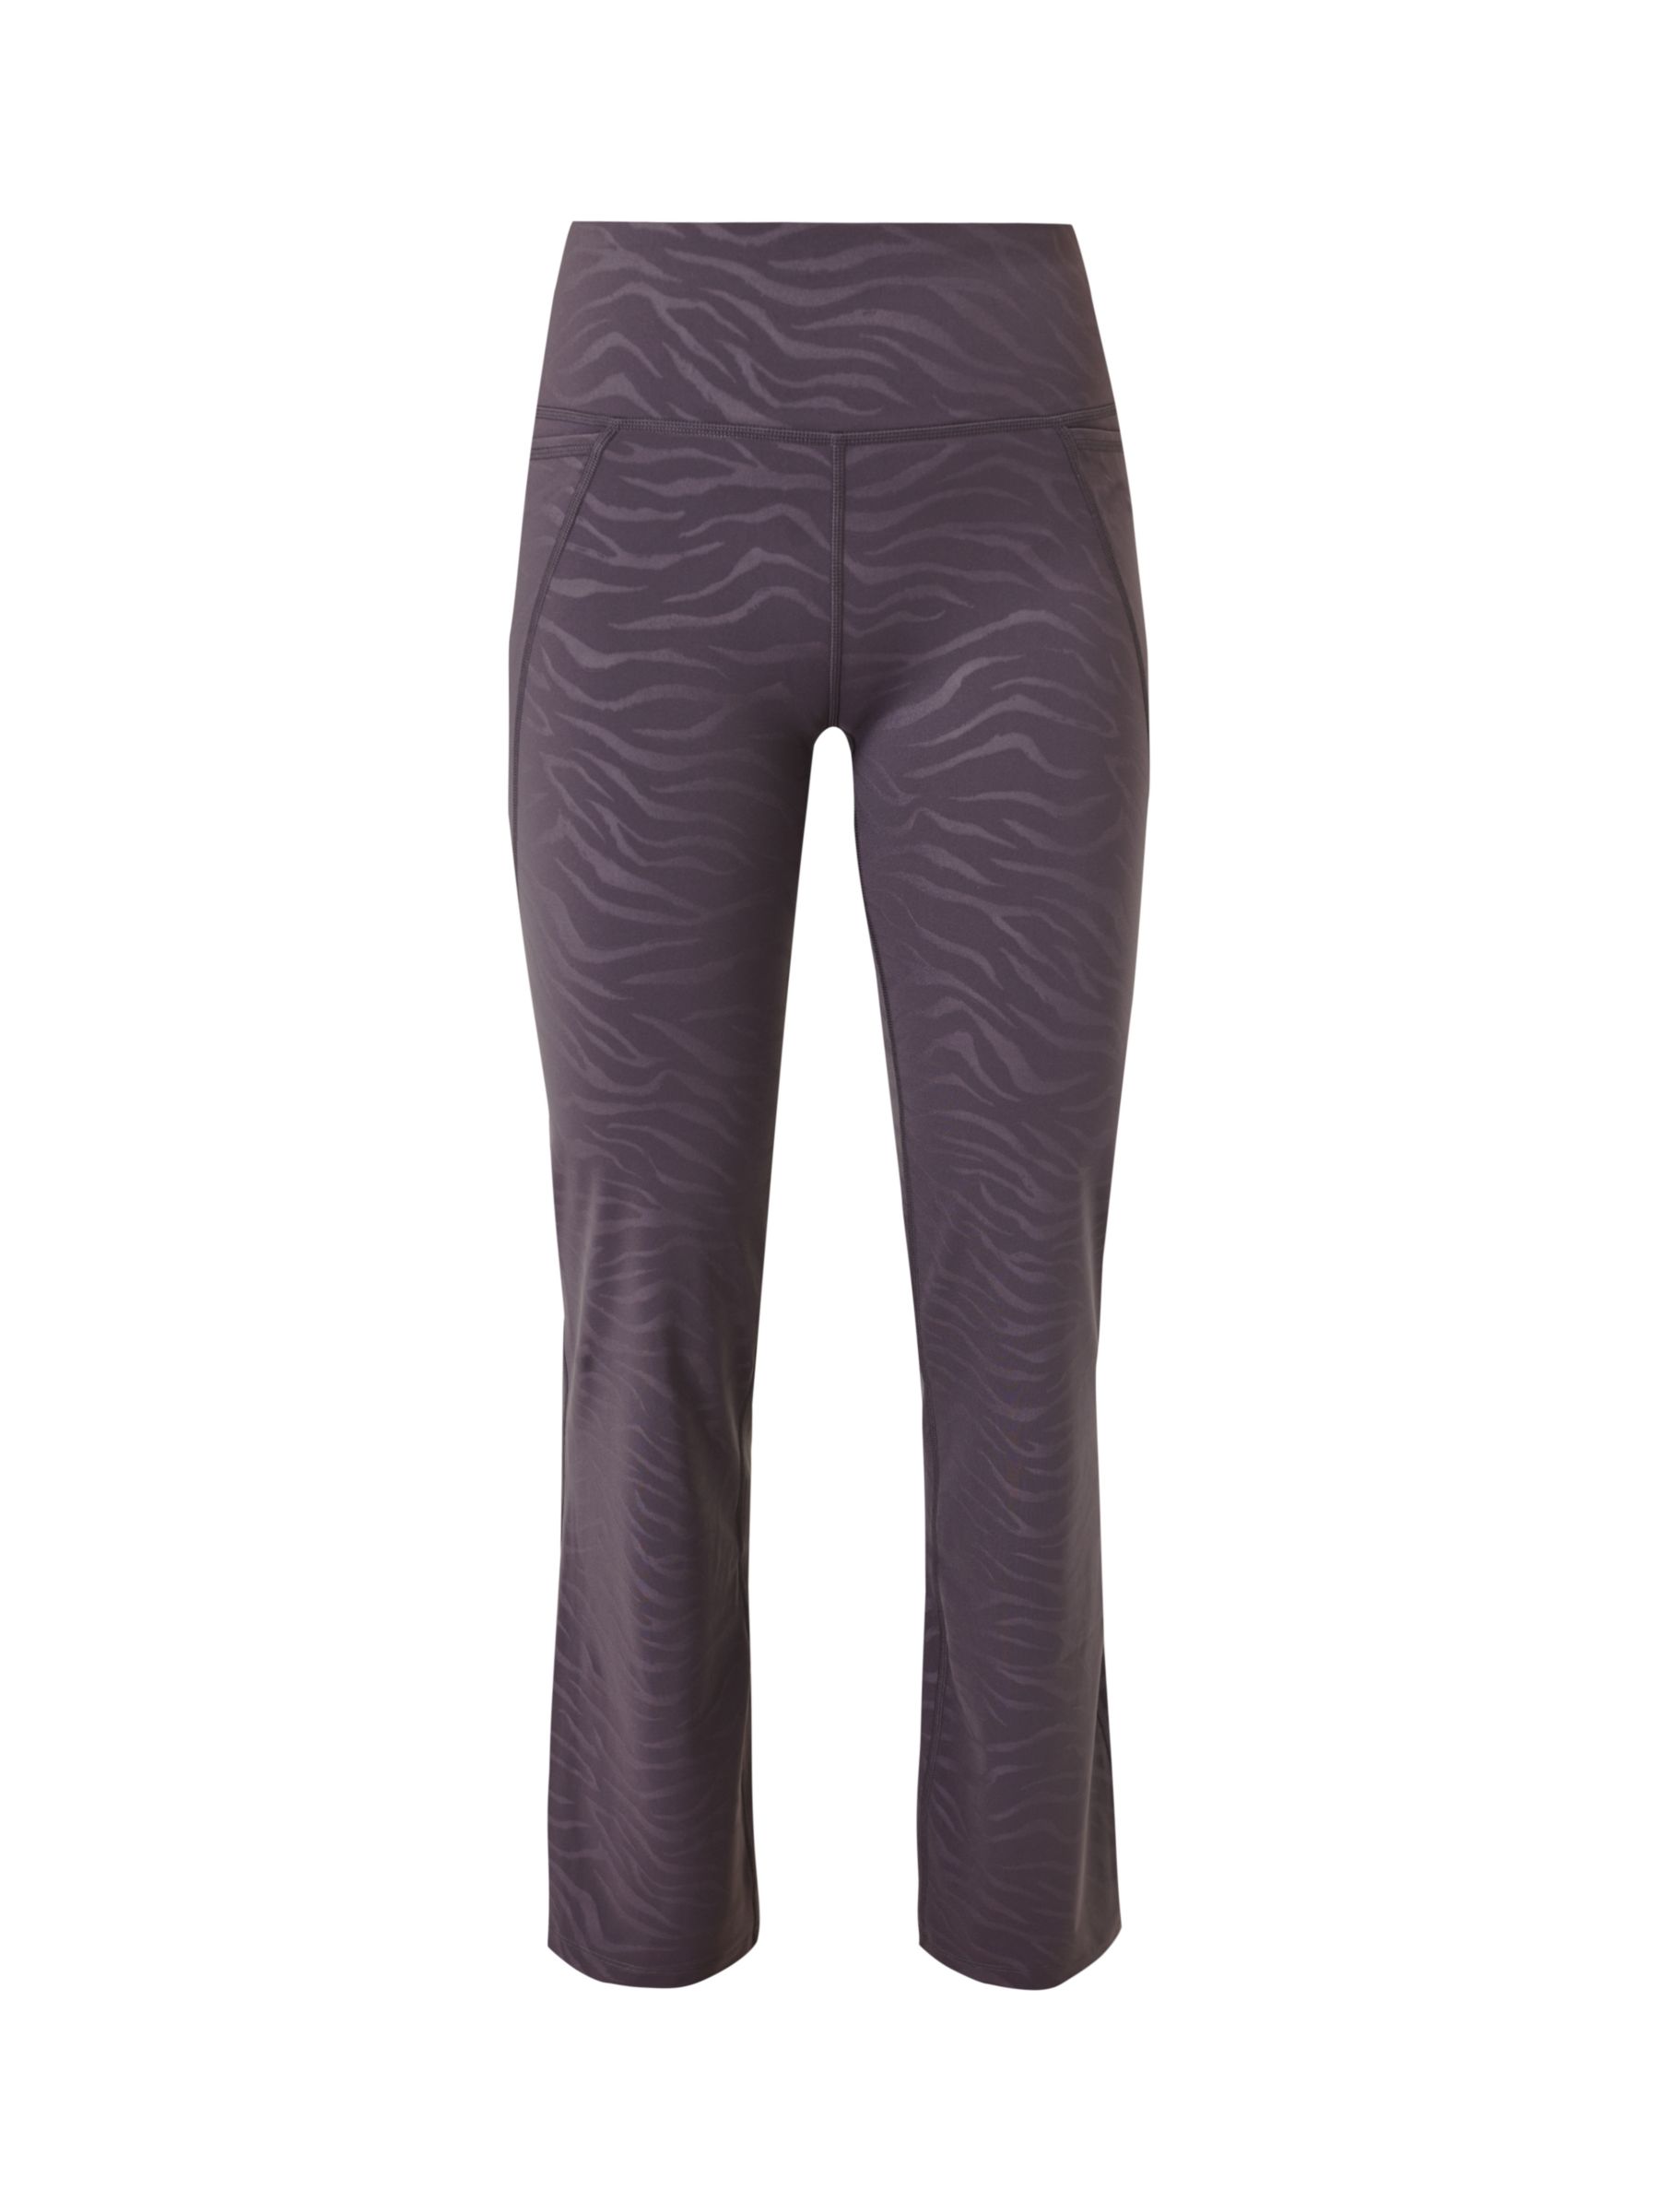 Buy Sweaty Betty Power 30" Embossed Gym Boot Cut Trousers, Urban Grey Tiger Print Online at johnlewis.com